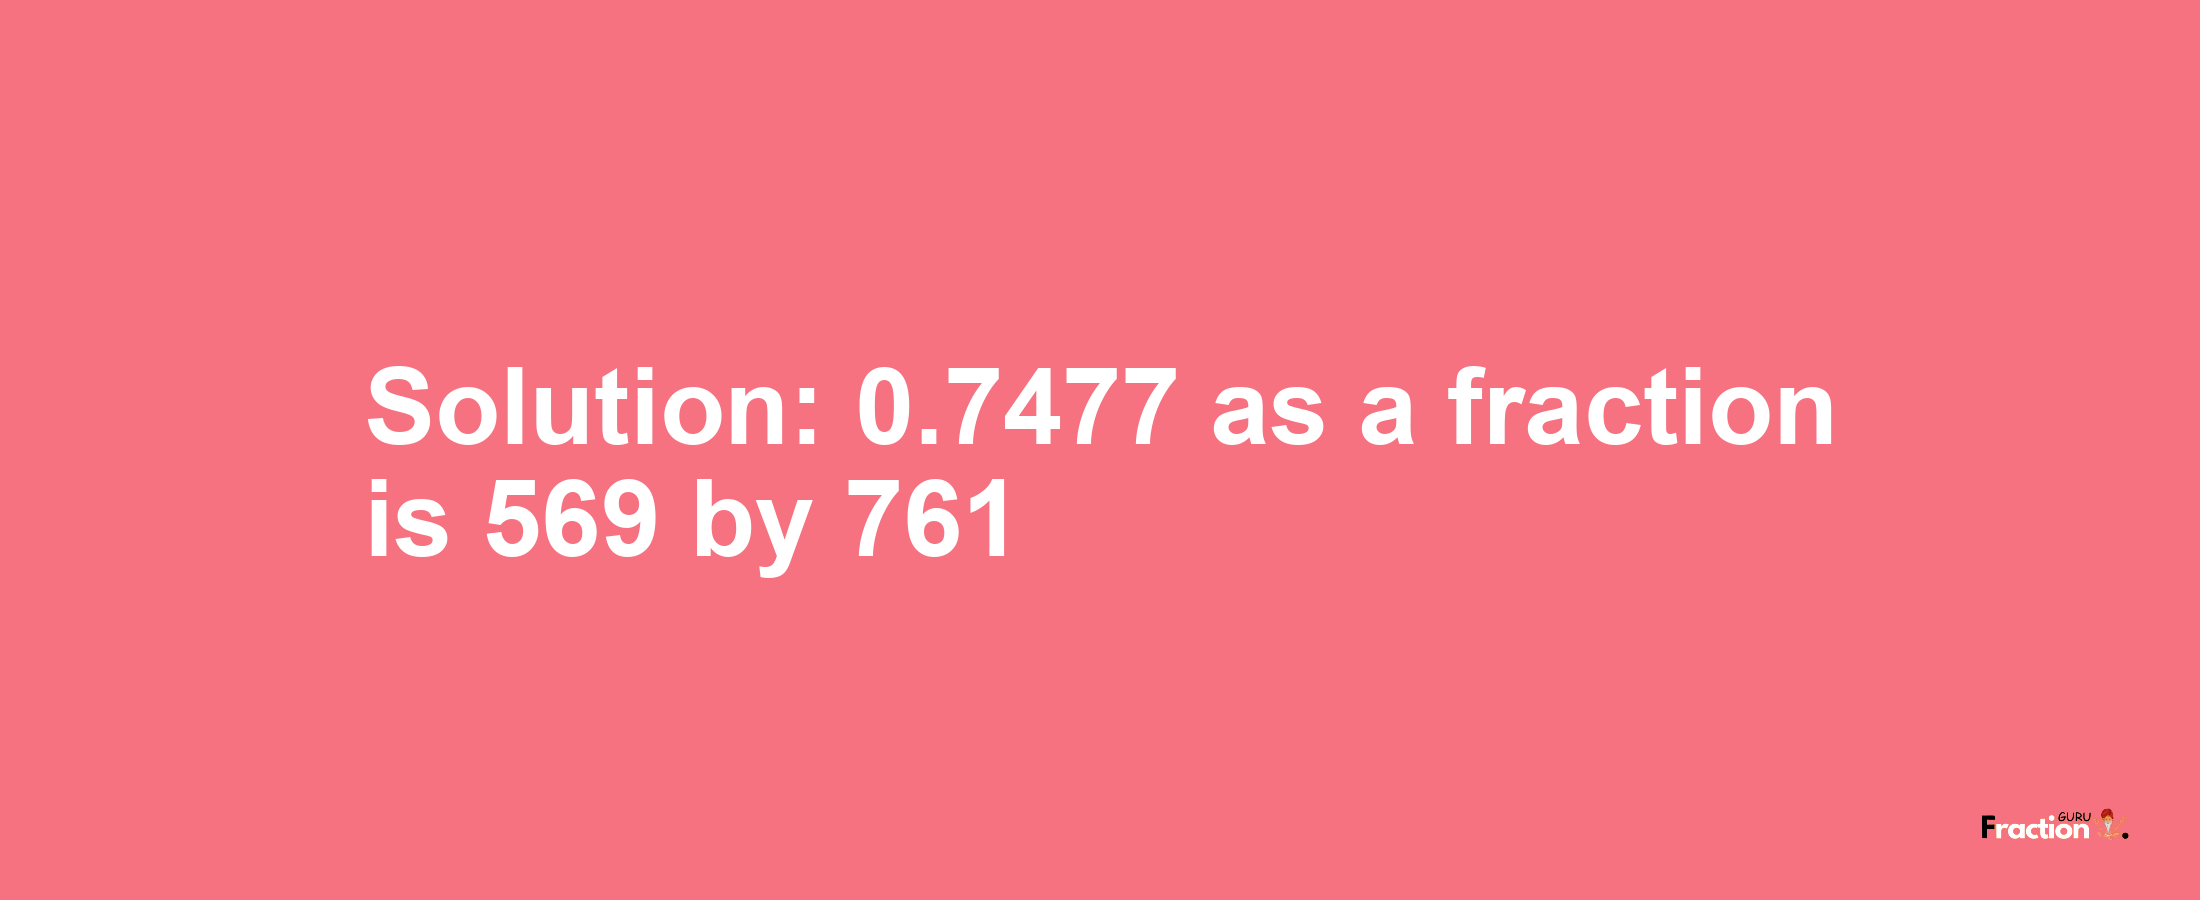 Solution:0.7477 as a fraction is 569/761